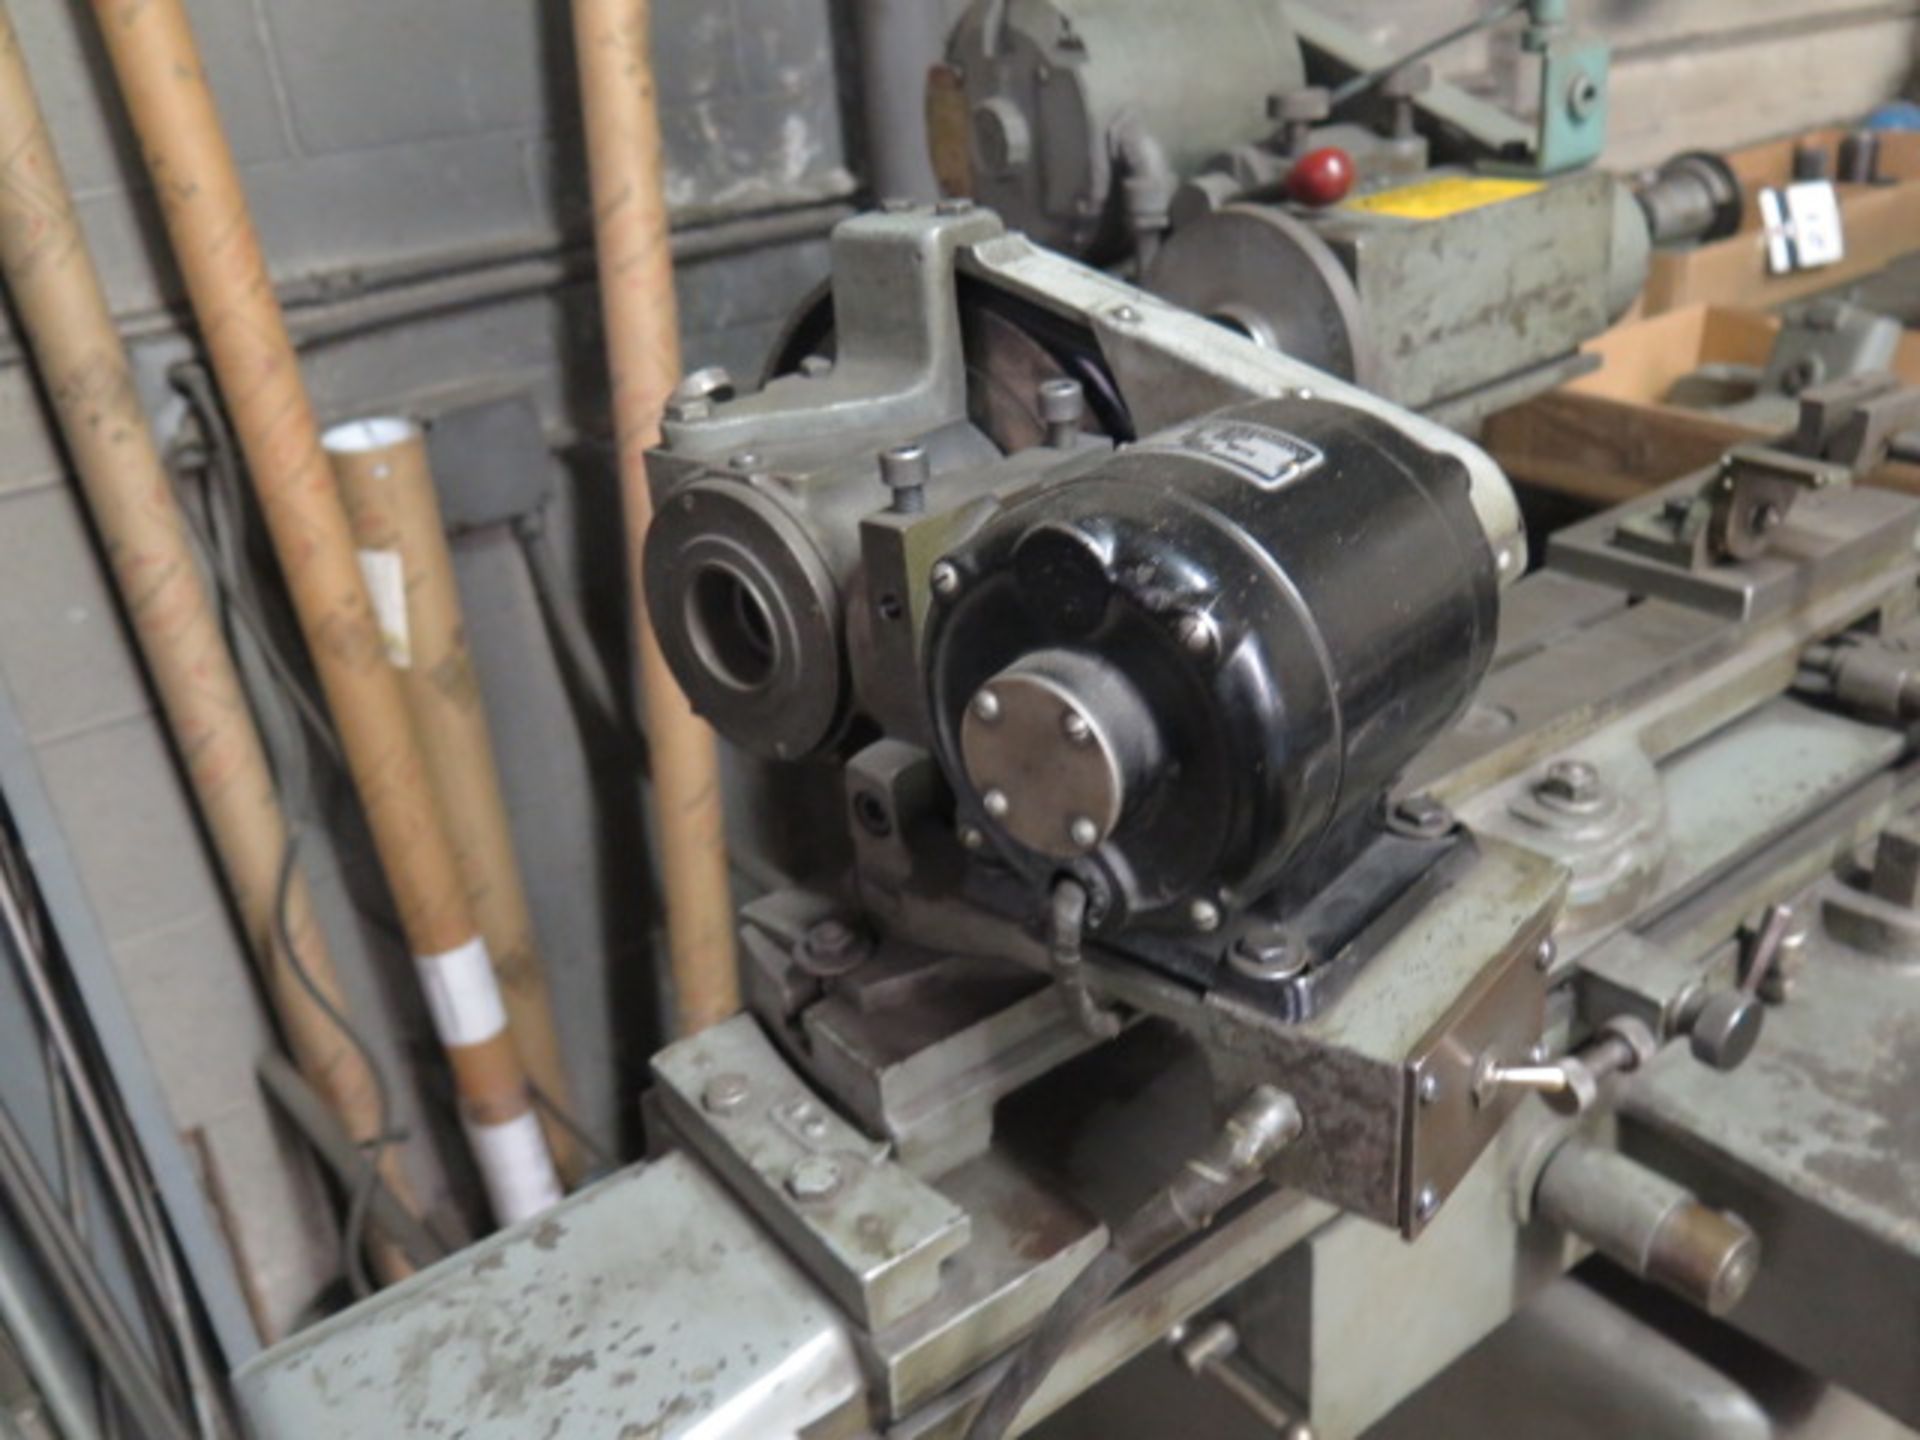 Clausing mdl. 4400 Tool & Cutter Grinder s/n 6A2695 w/ Compound Grinding Head, Motorized Work Head - Image 6 of 7